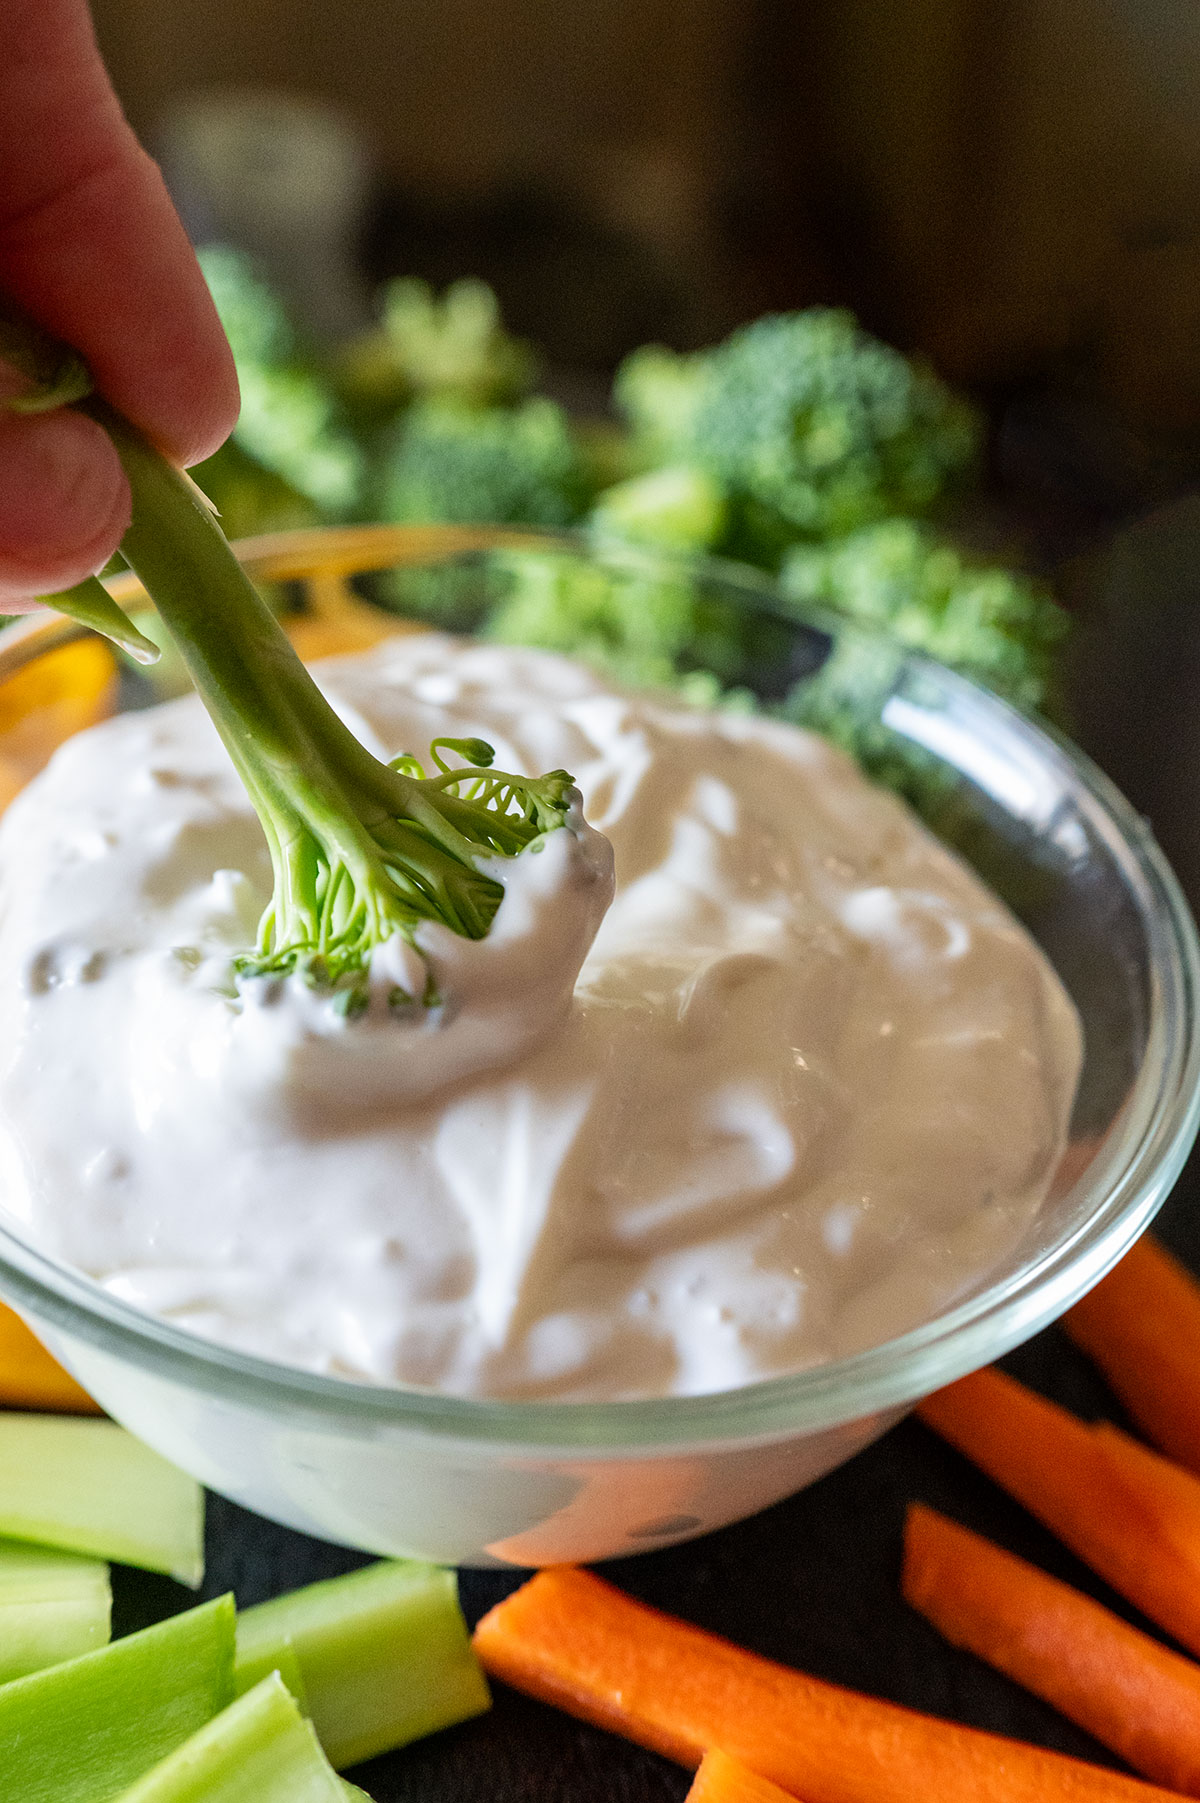 Dunking broccoli in blue cheese dip. 